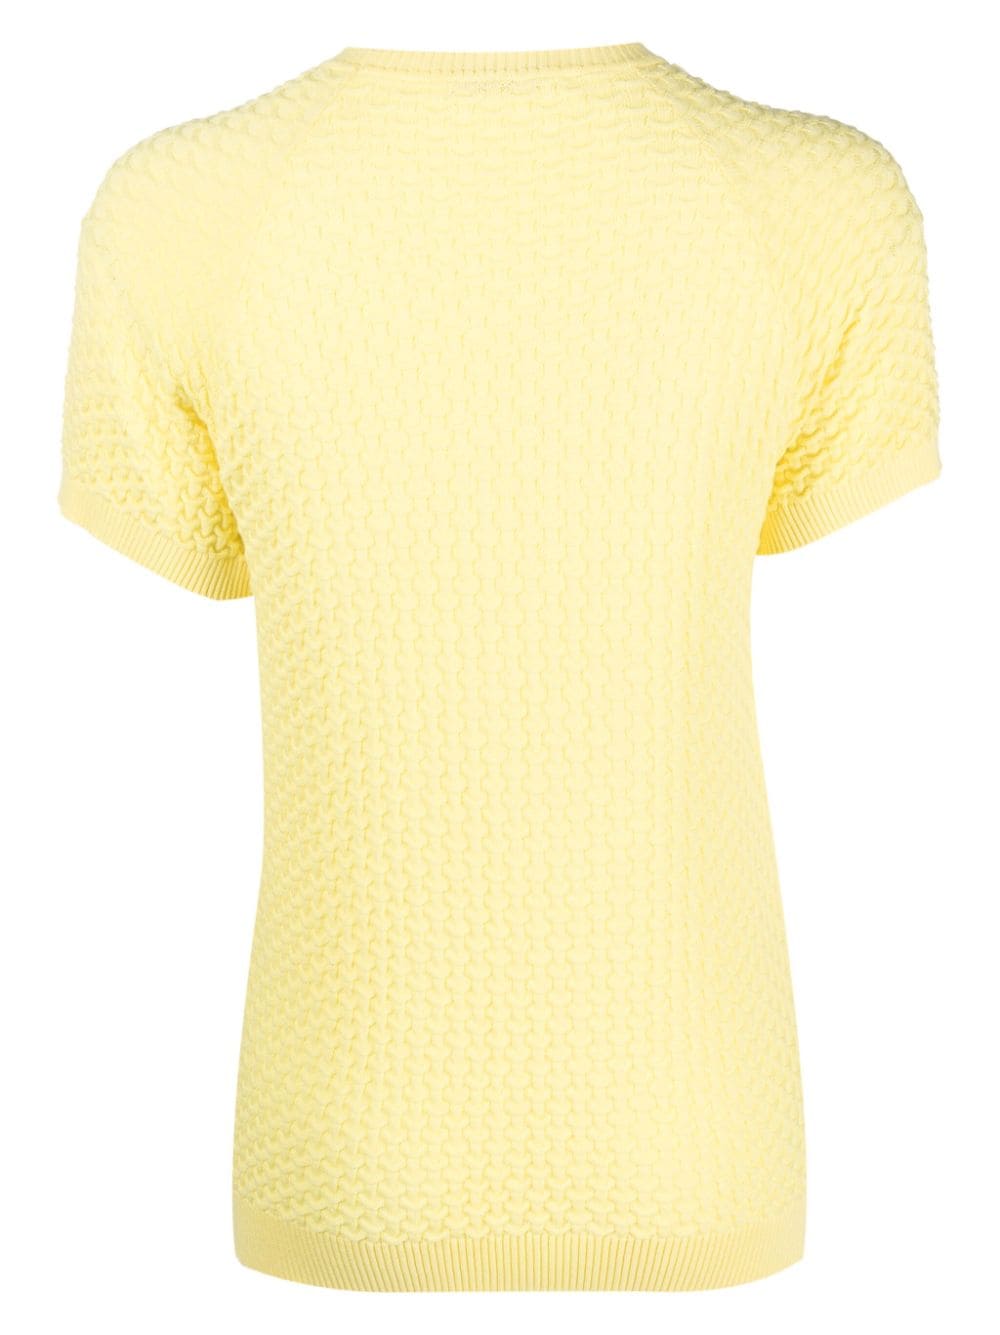 Circolo 1901 short-sleeve knitted top - Geel